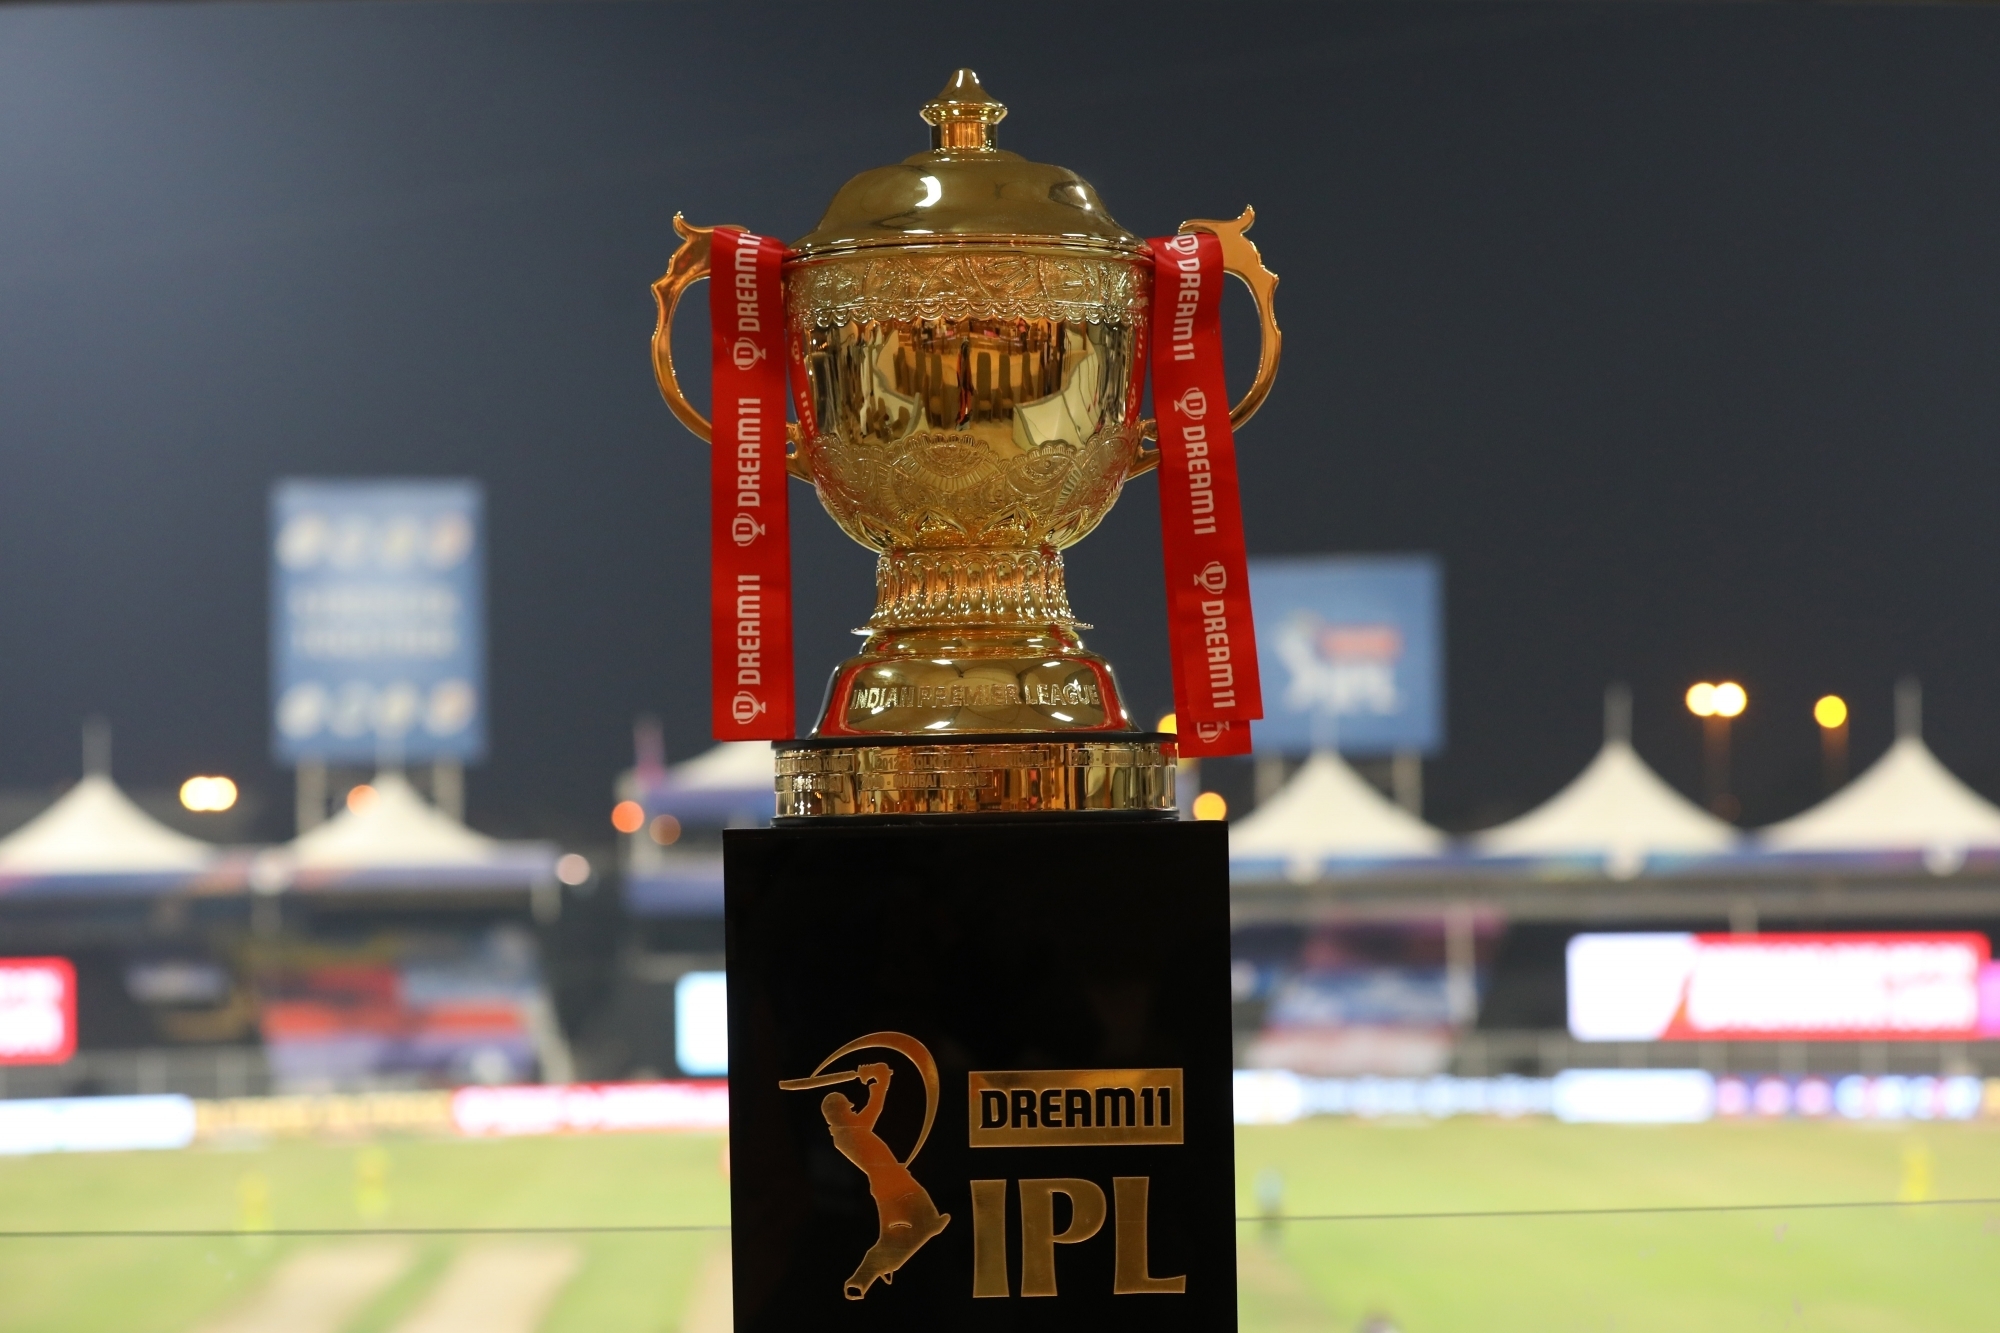 A player from an IPL franchise reported a corrupt approach | Twitter